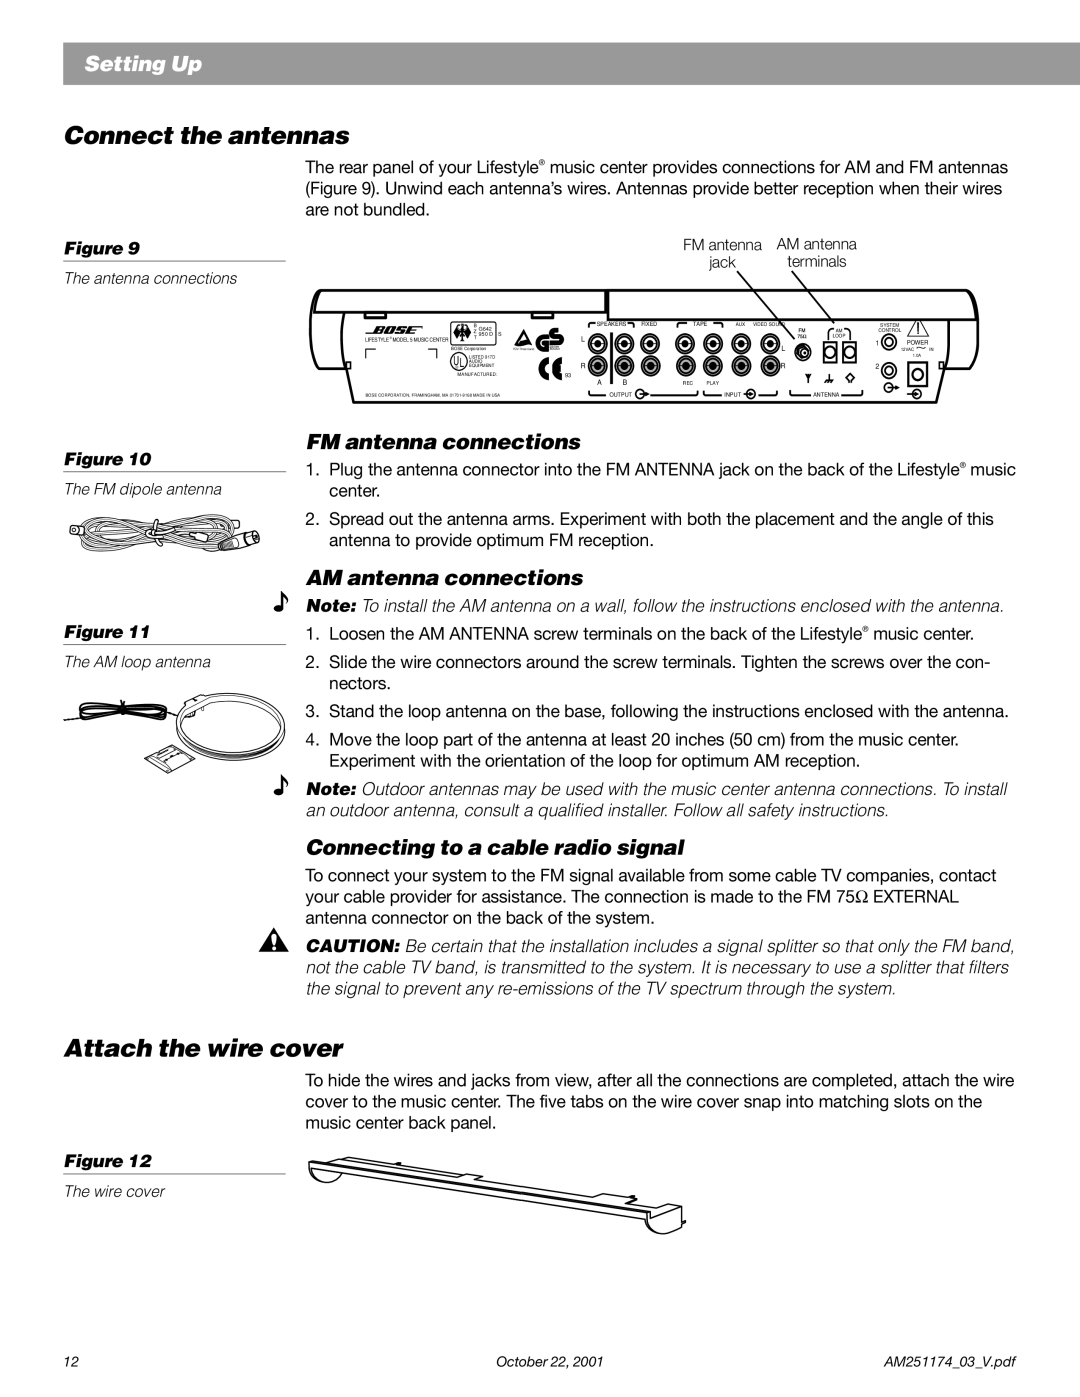 Bose 5 manual Setting Up, FM antenna connections, AM antenna connections, Connecting to a cable radio signal 